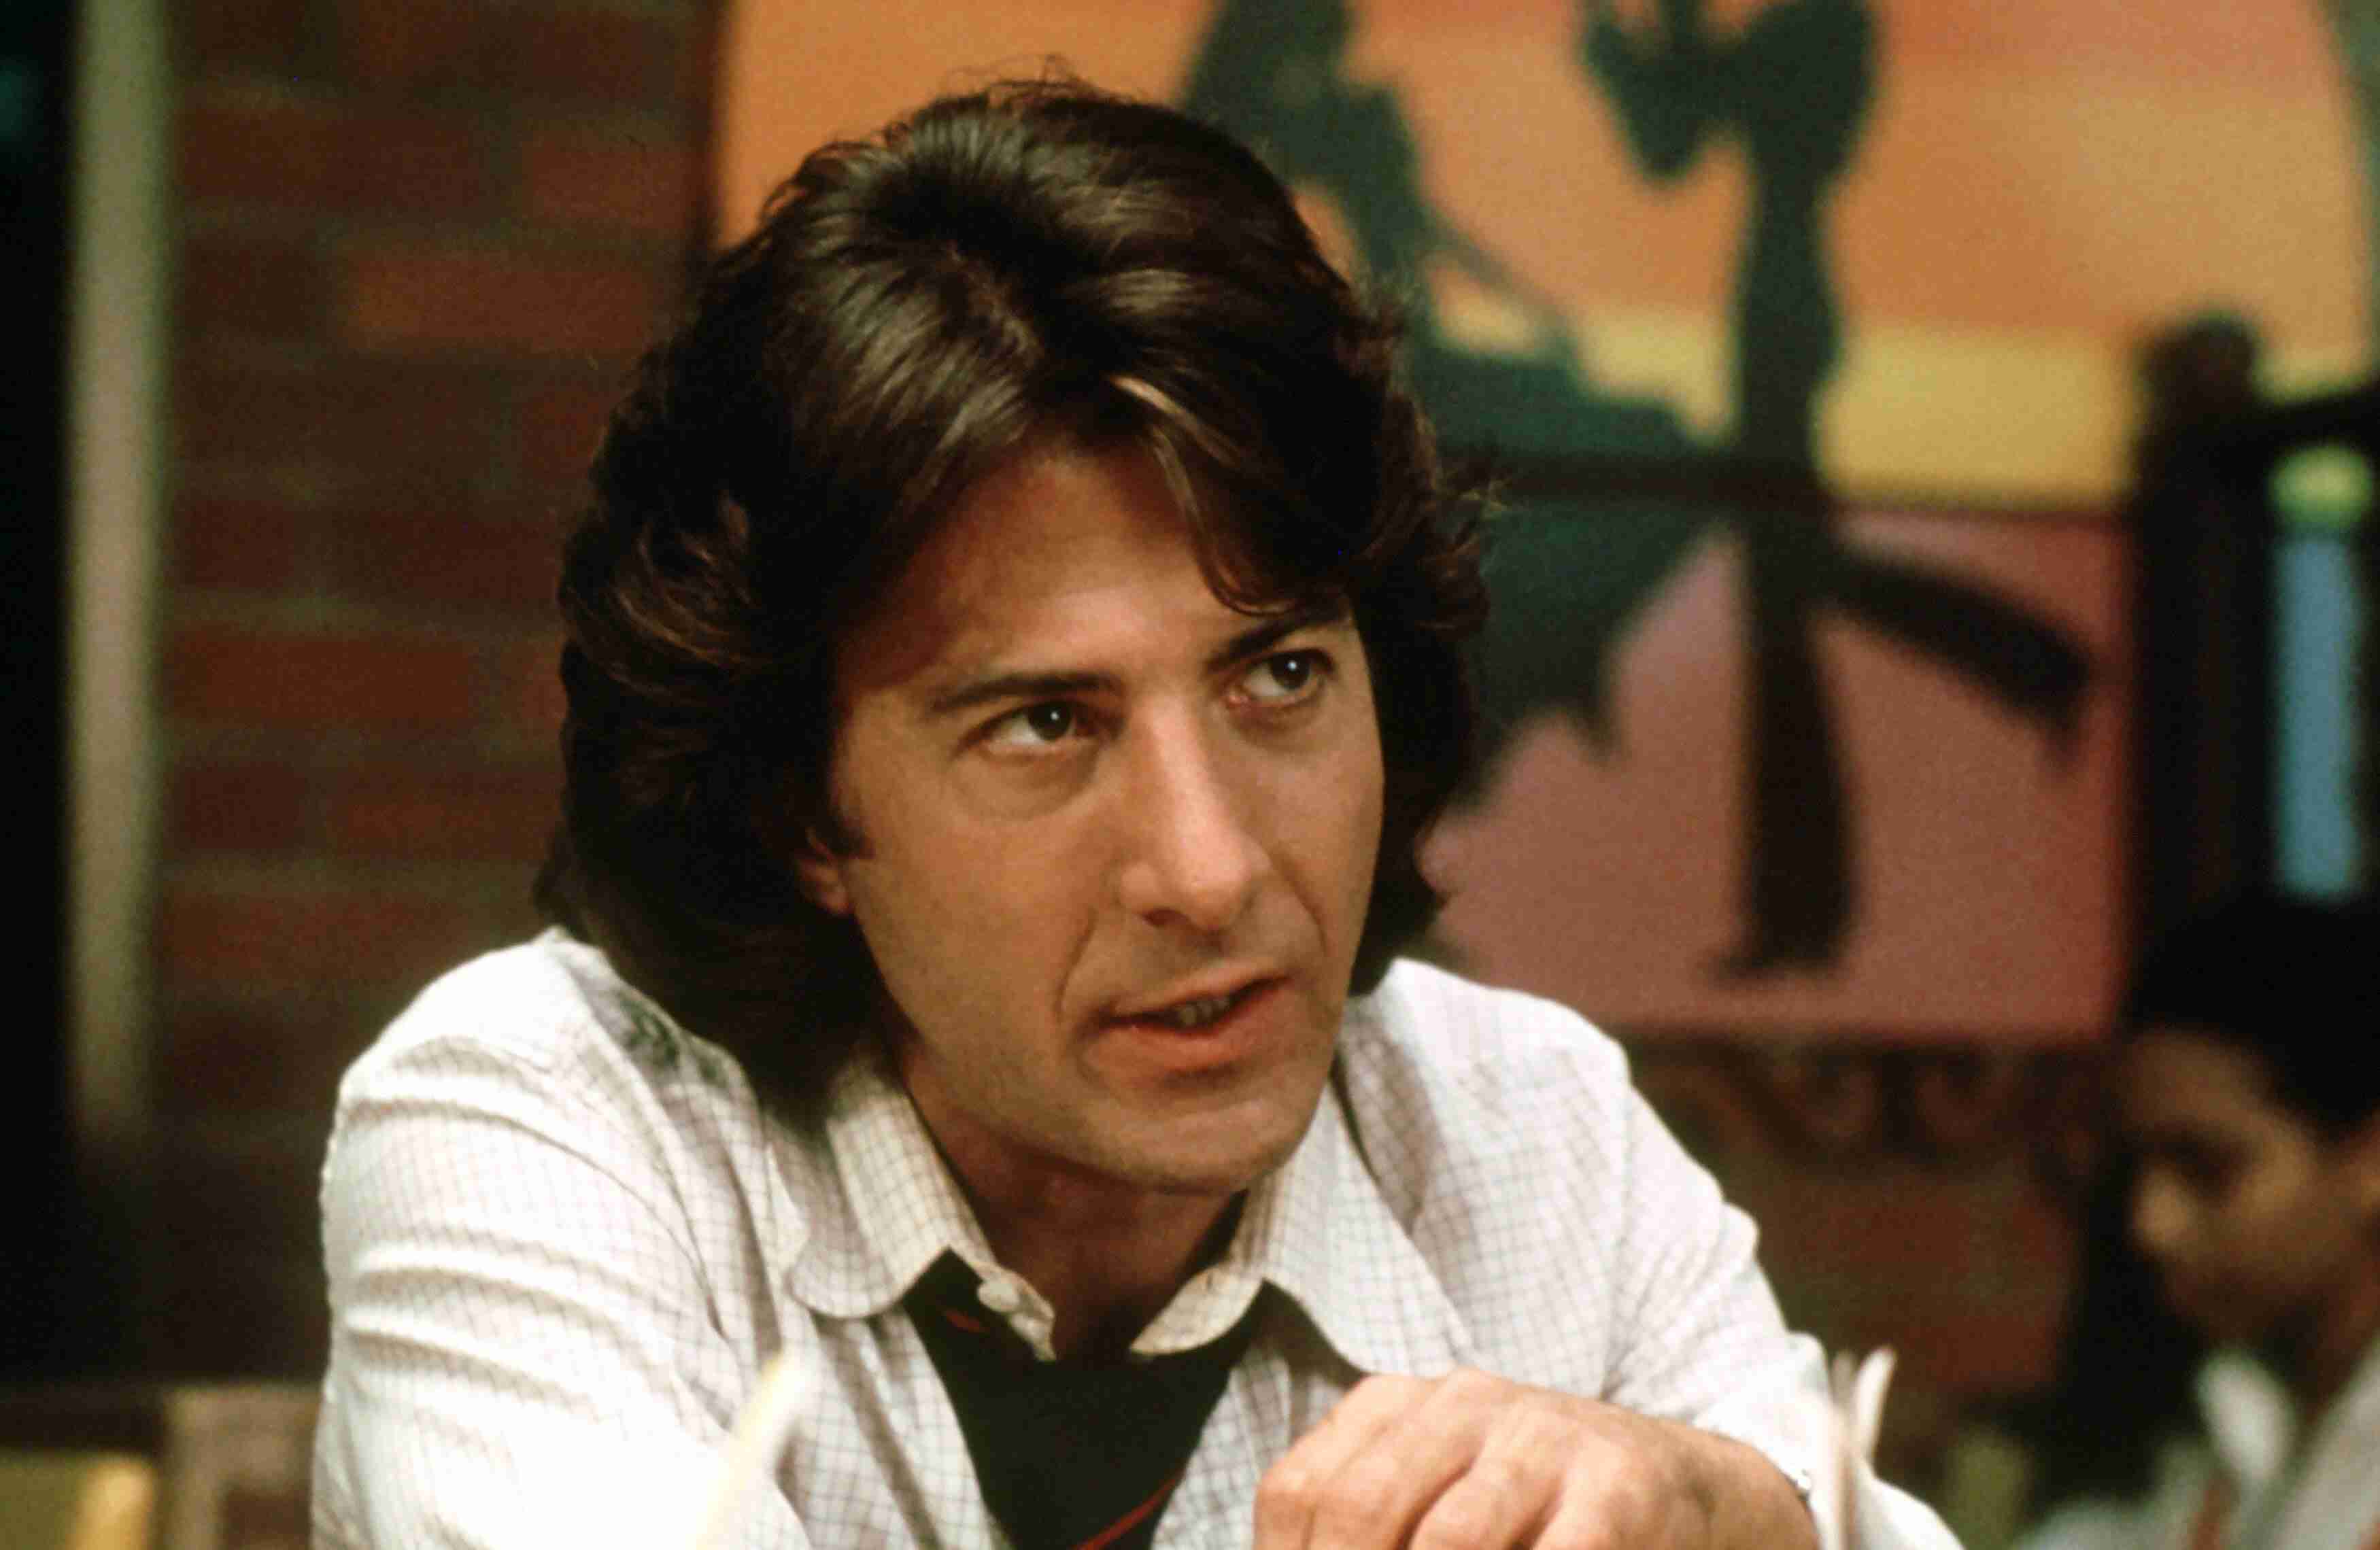 33 Facts About Dustin Hoffman - Facts.net